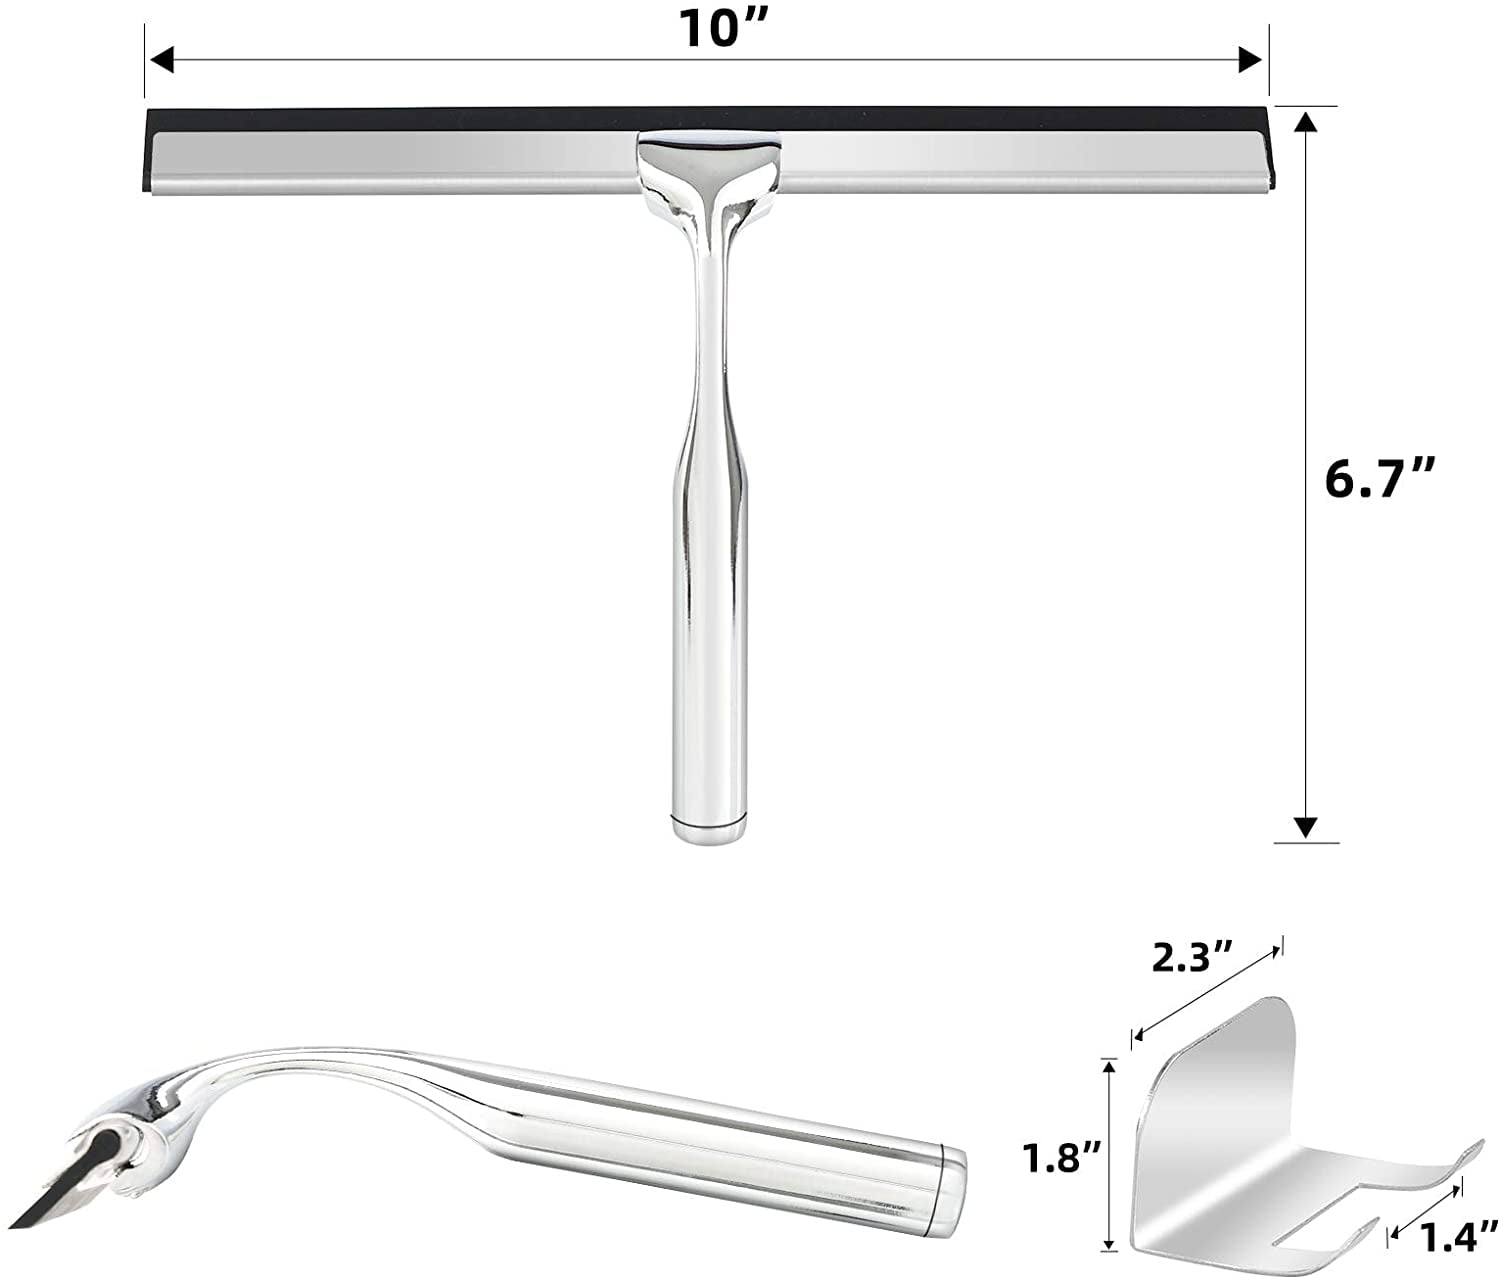 XBllcyiv All-Purpose Shower Squeegee for Shower Doors, Bathroom, Window and  Car Glass - Stainless Steel (Silver (Color), 10 Inches) - Coupon Codes,  Promo Codes, Daily Deals, Save Money Today